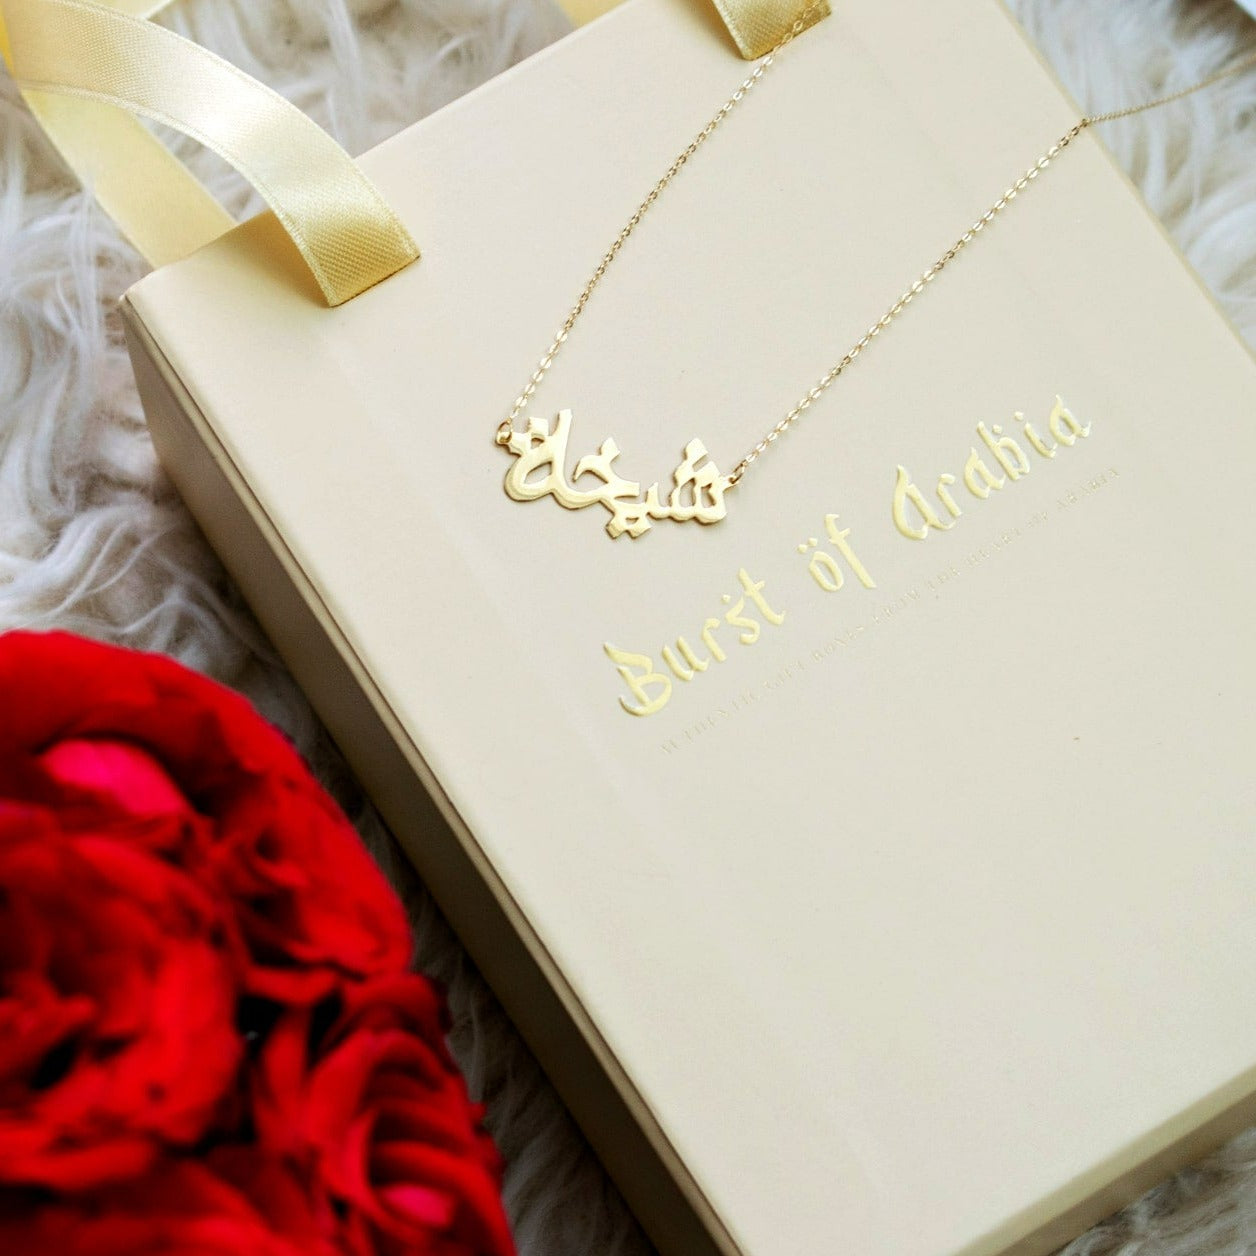 Gold Multiple Name Heart Necklace - available in gold. Made in real gold, this fine name necklace is locally handcrafted with the highest quality materials and artisans available in Dubai.  Great addition to your jewelry collection and is also the ideal wedding or anniversary gift for a loved one.